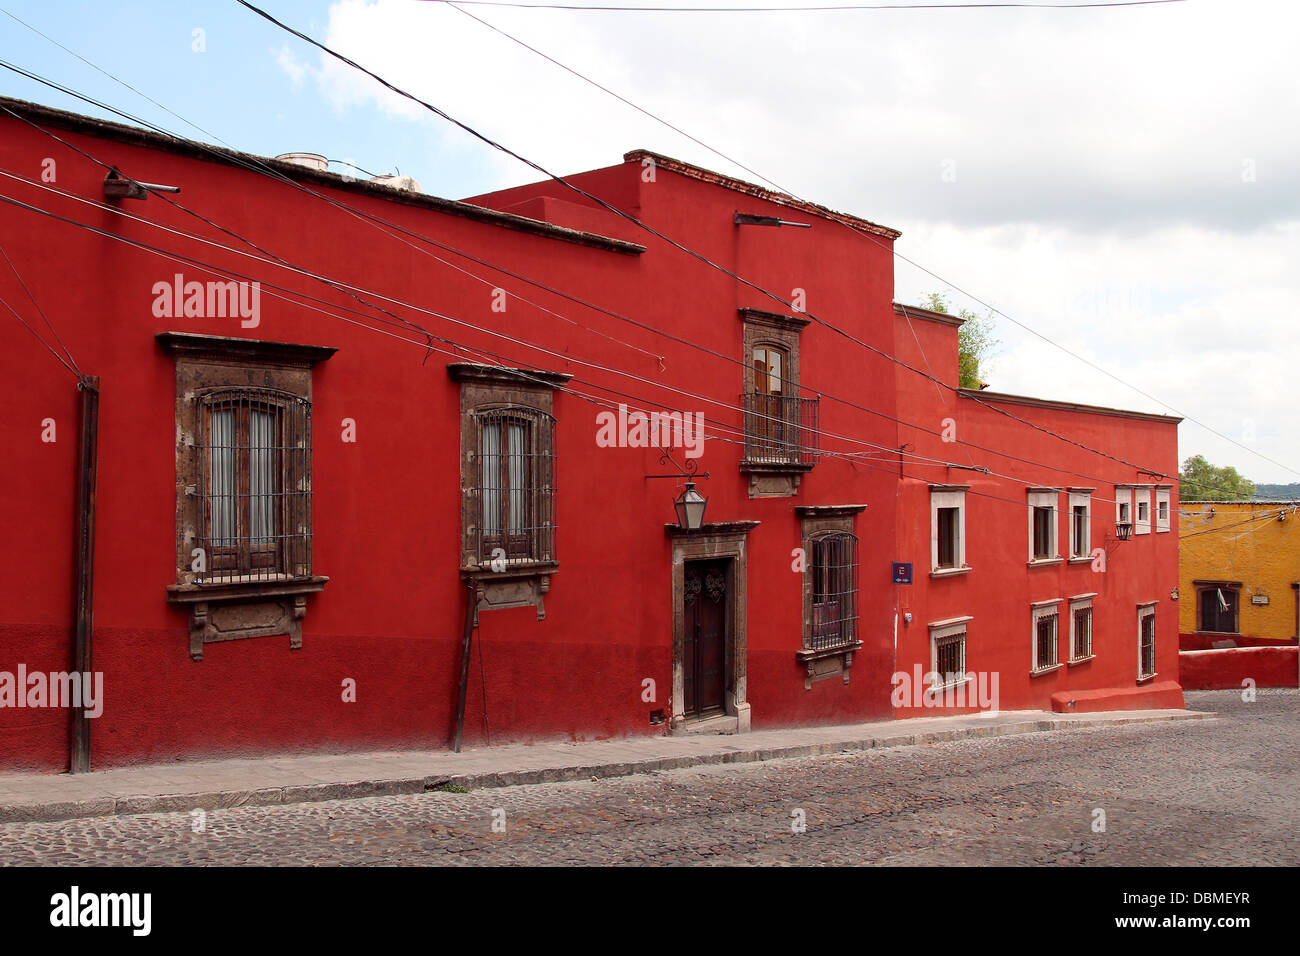 Typical mexican street with colorful buildings Stock Photo